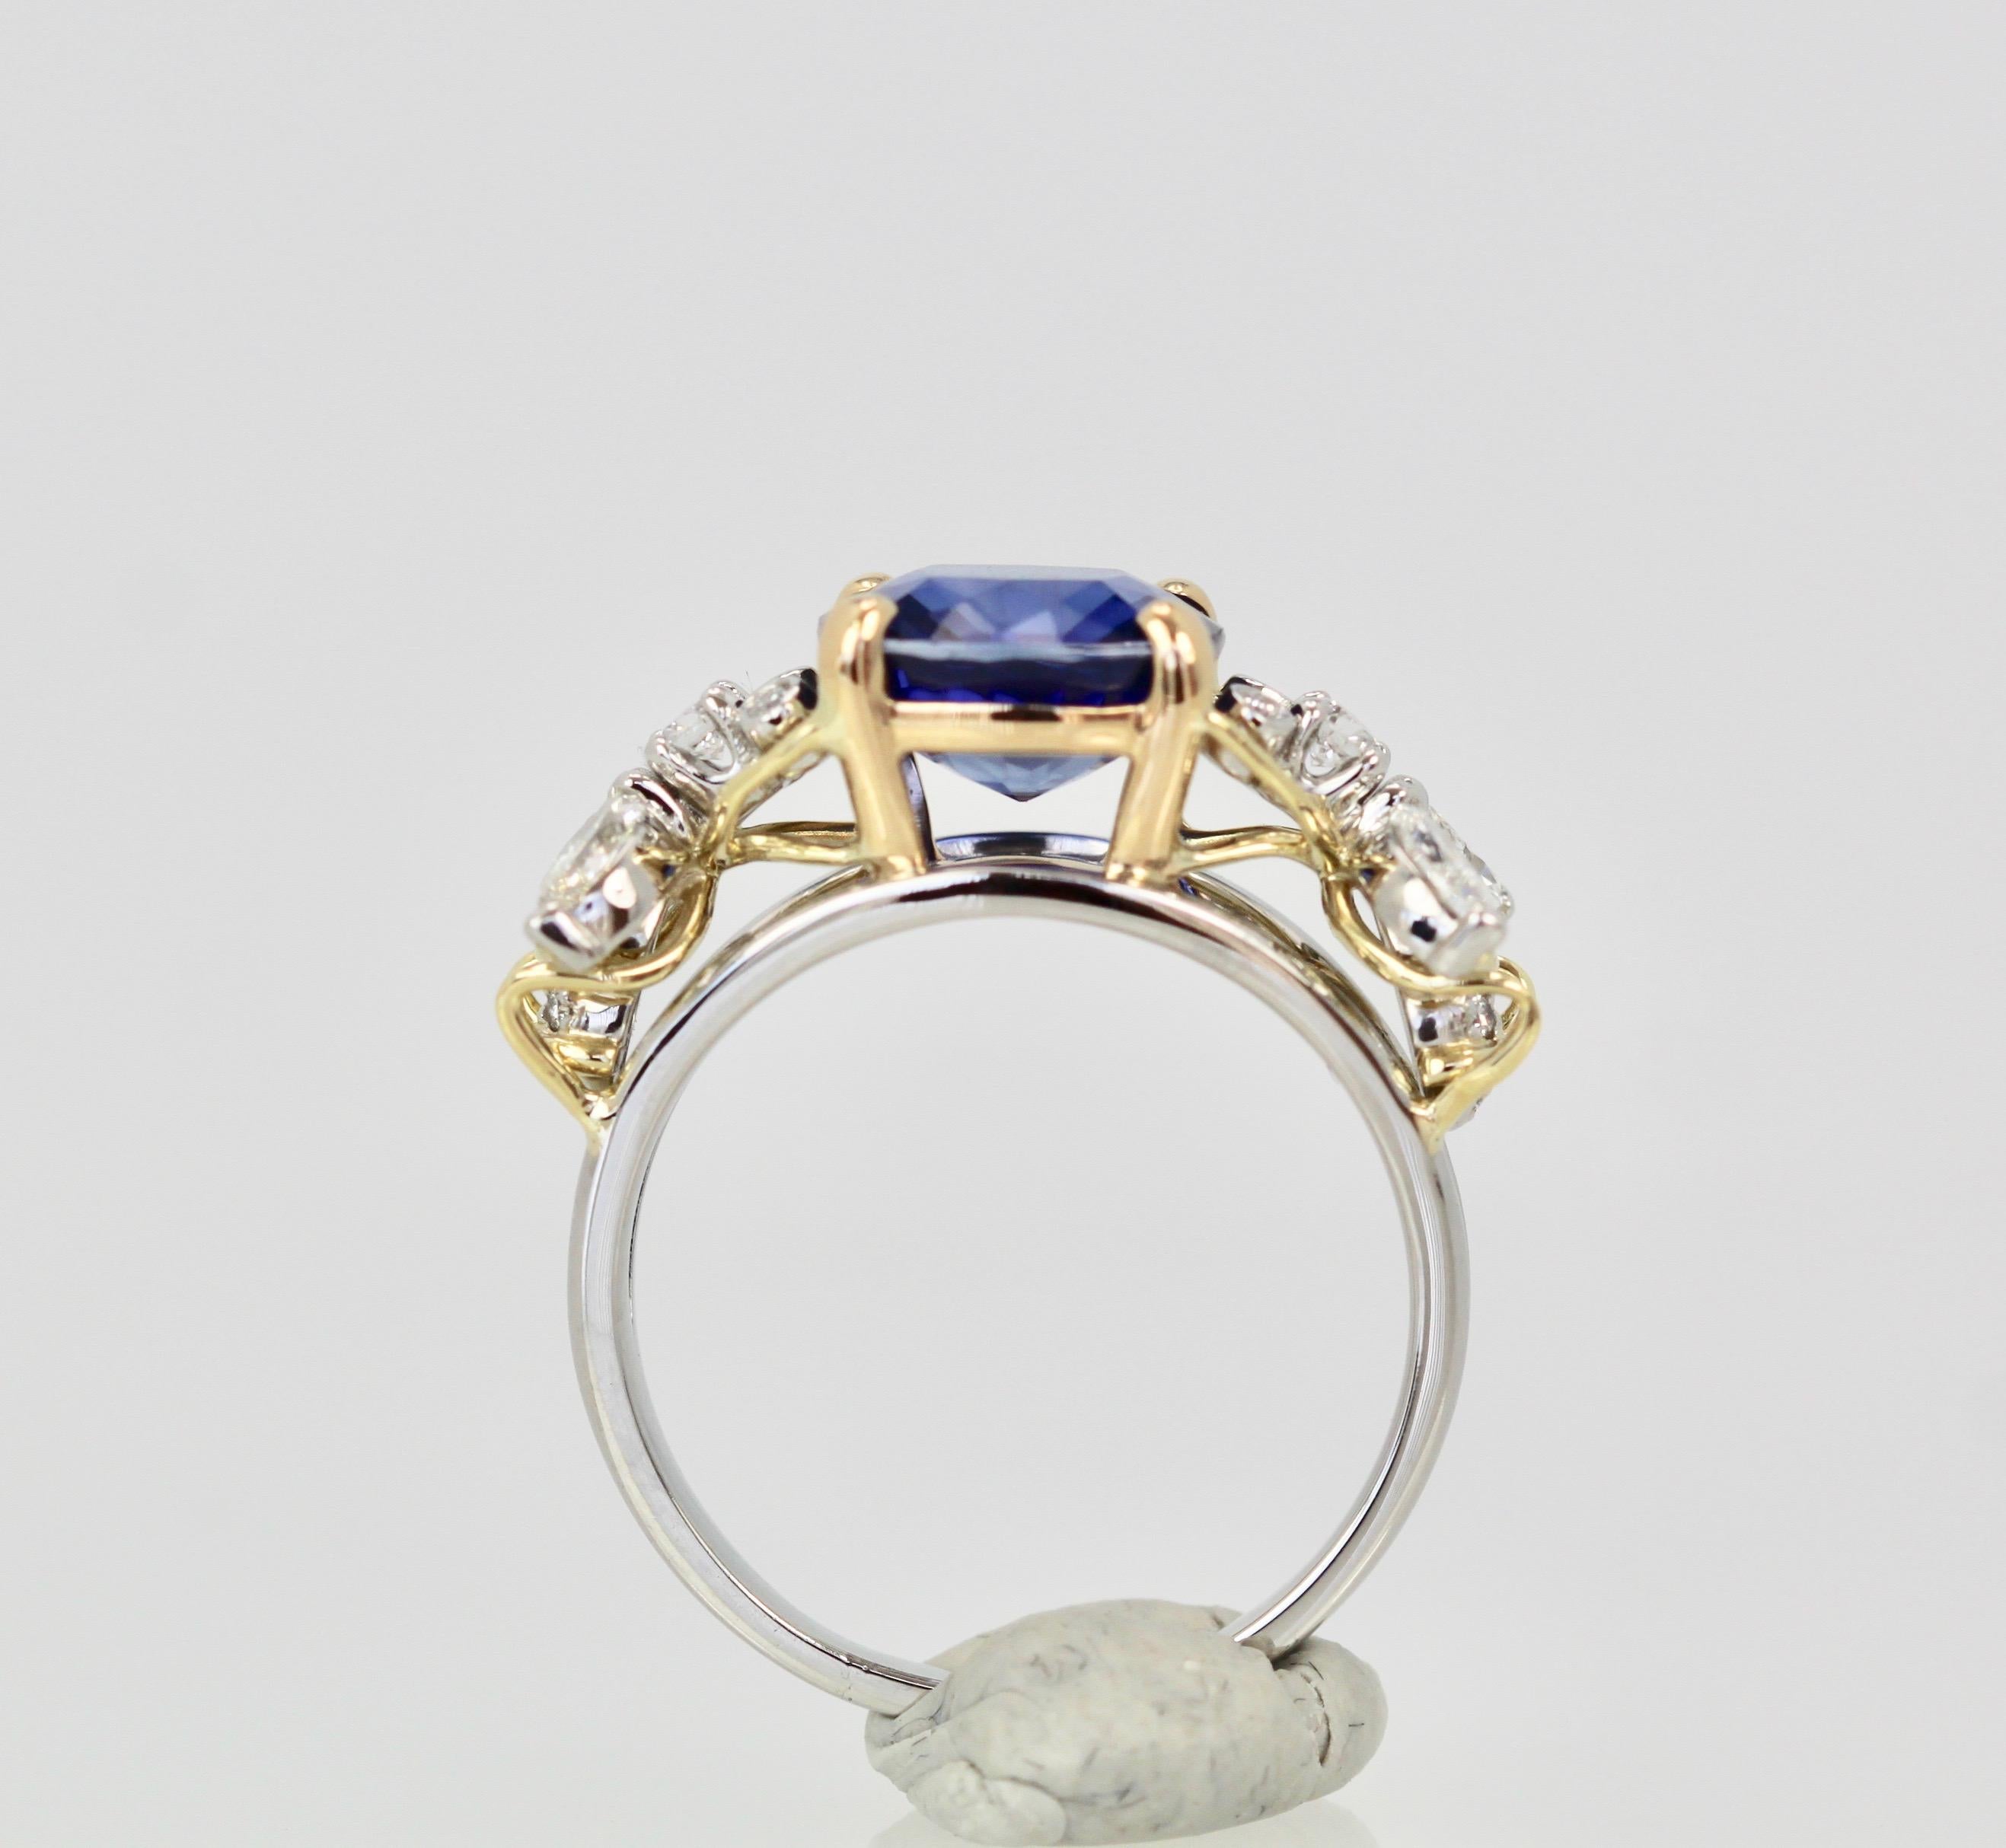 Artisan Tiffany & Co. Schlumberger Double Bee Ring with Blue Sapphire Diamonds